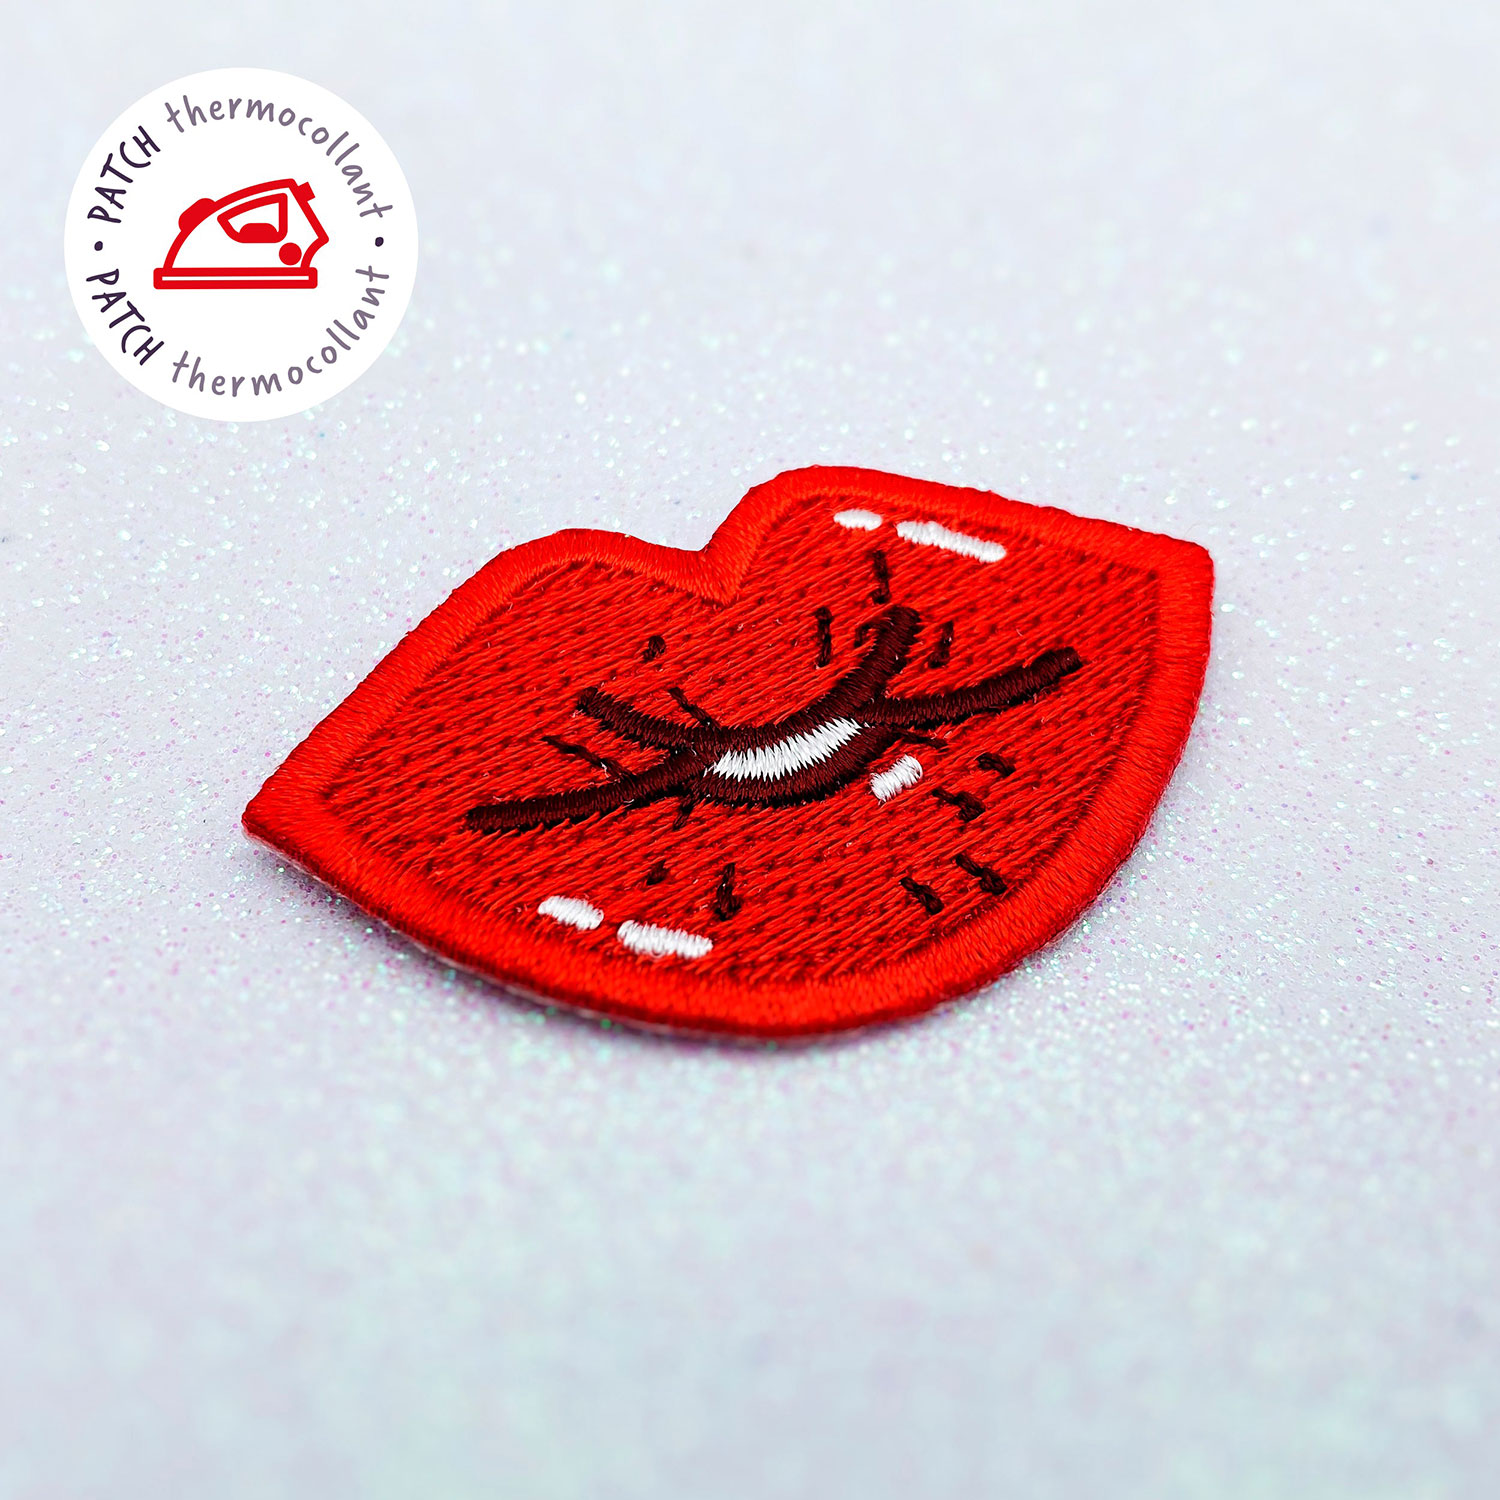 Patch Thermocollant Alice B - Red kiss 8